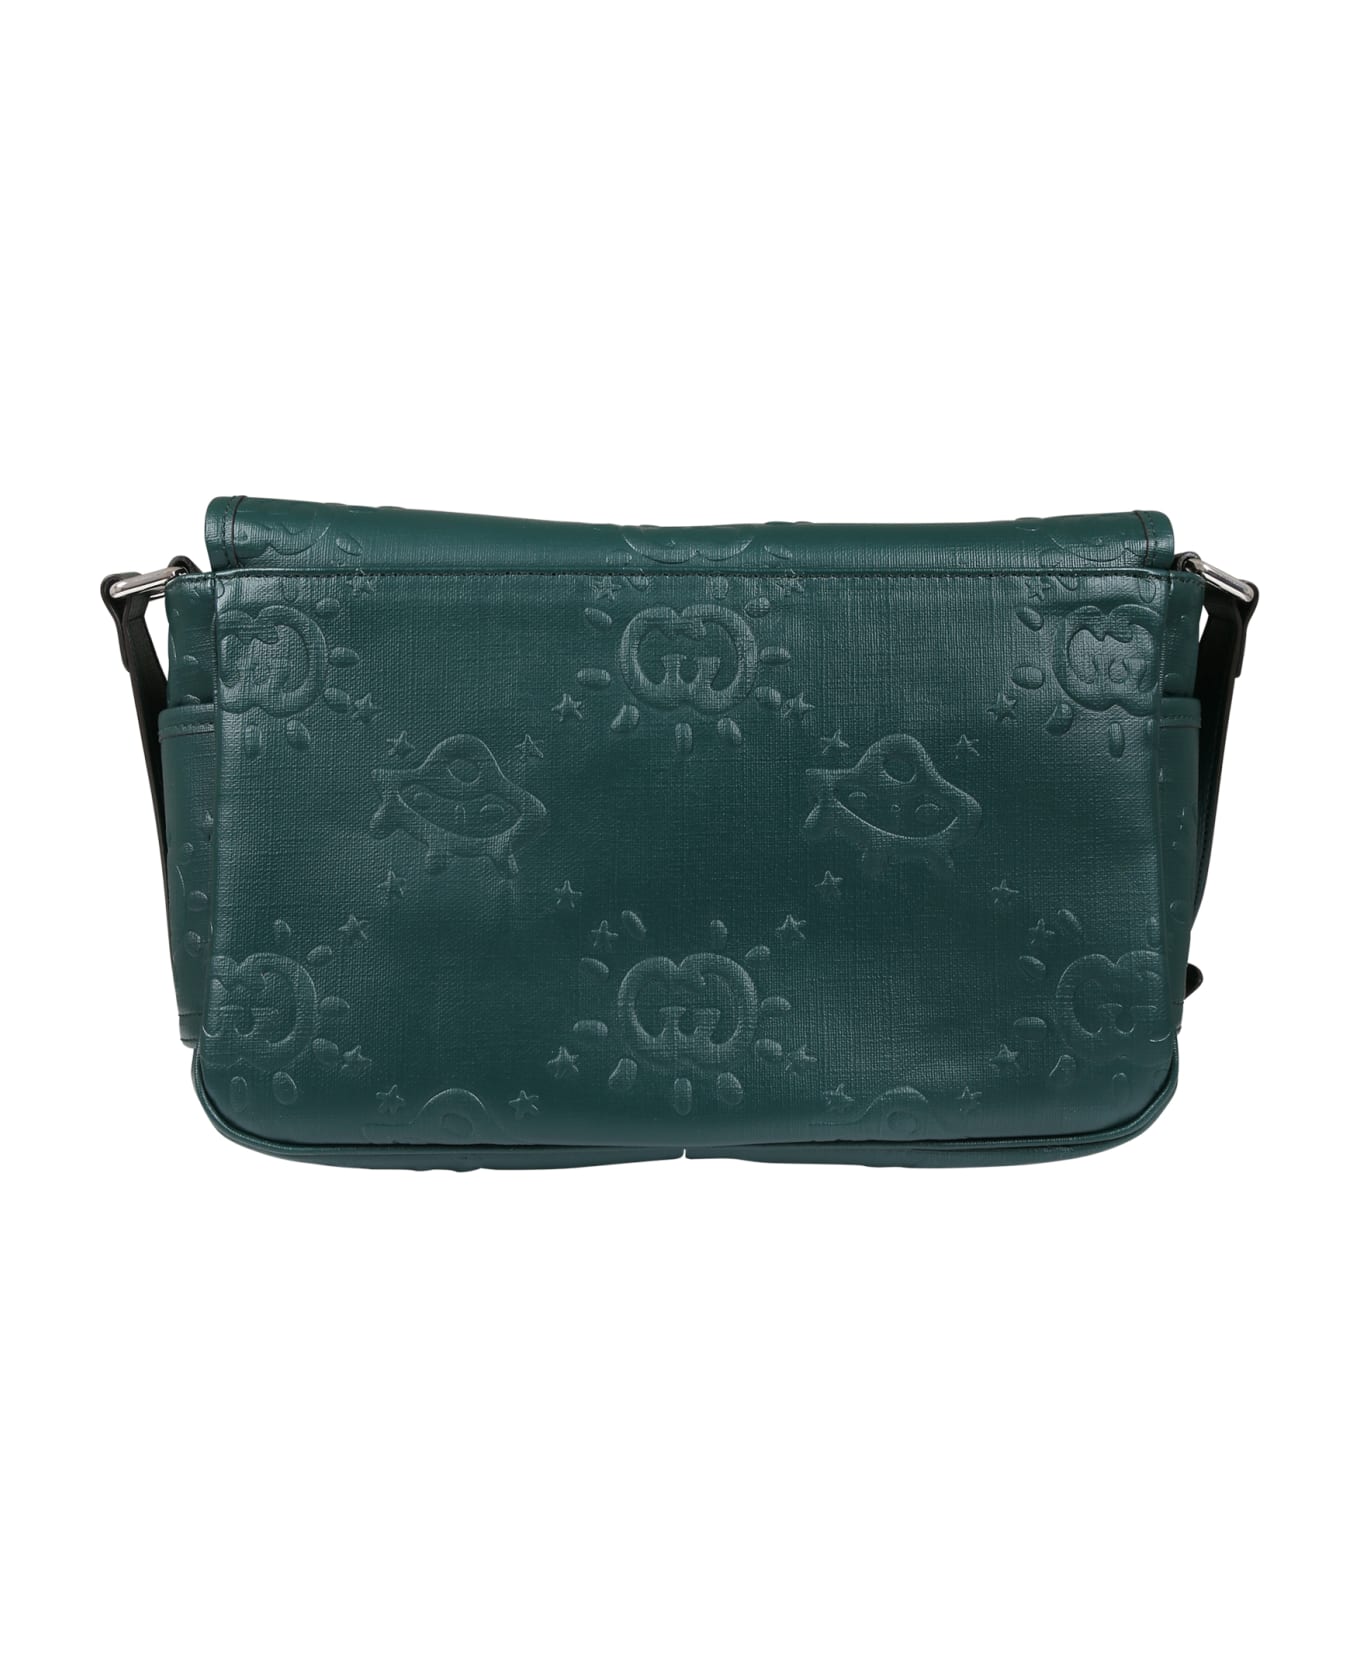 Gucci Green Bag For Girl With Gg Cross - Green アクセサリー＆ギフト